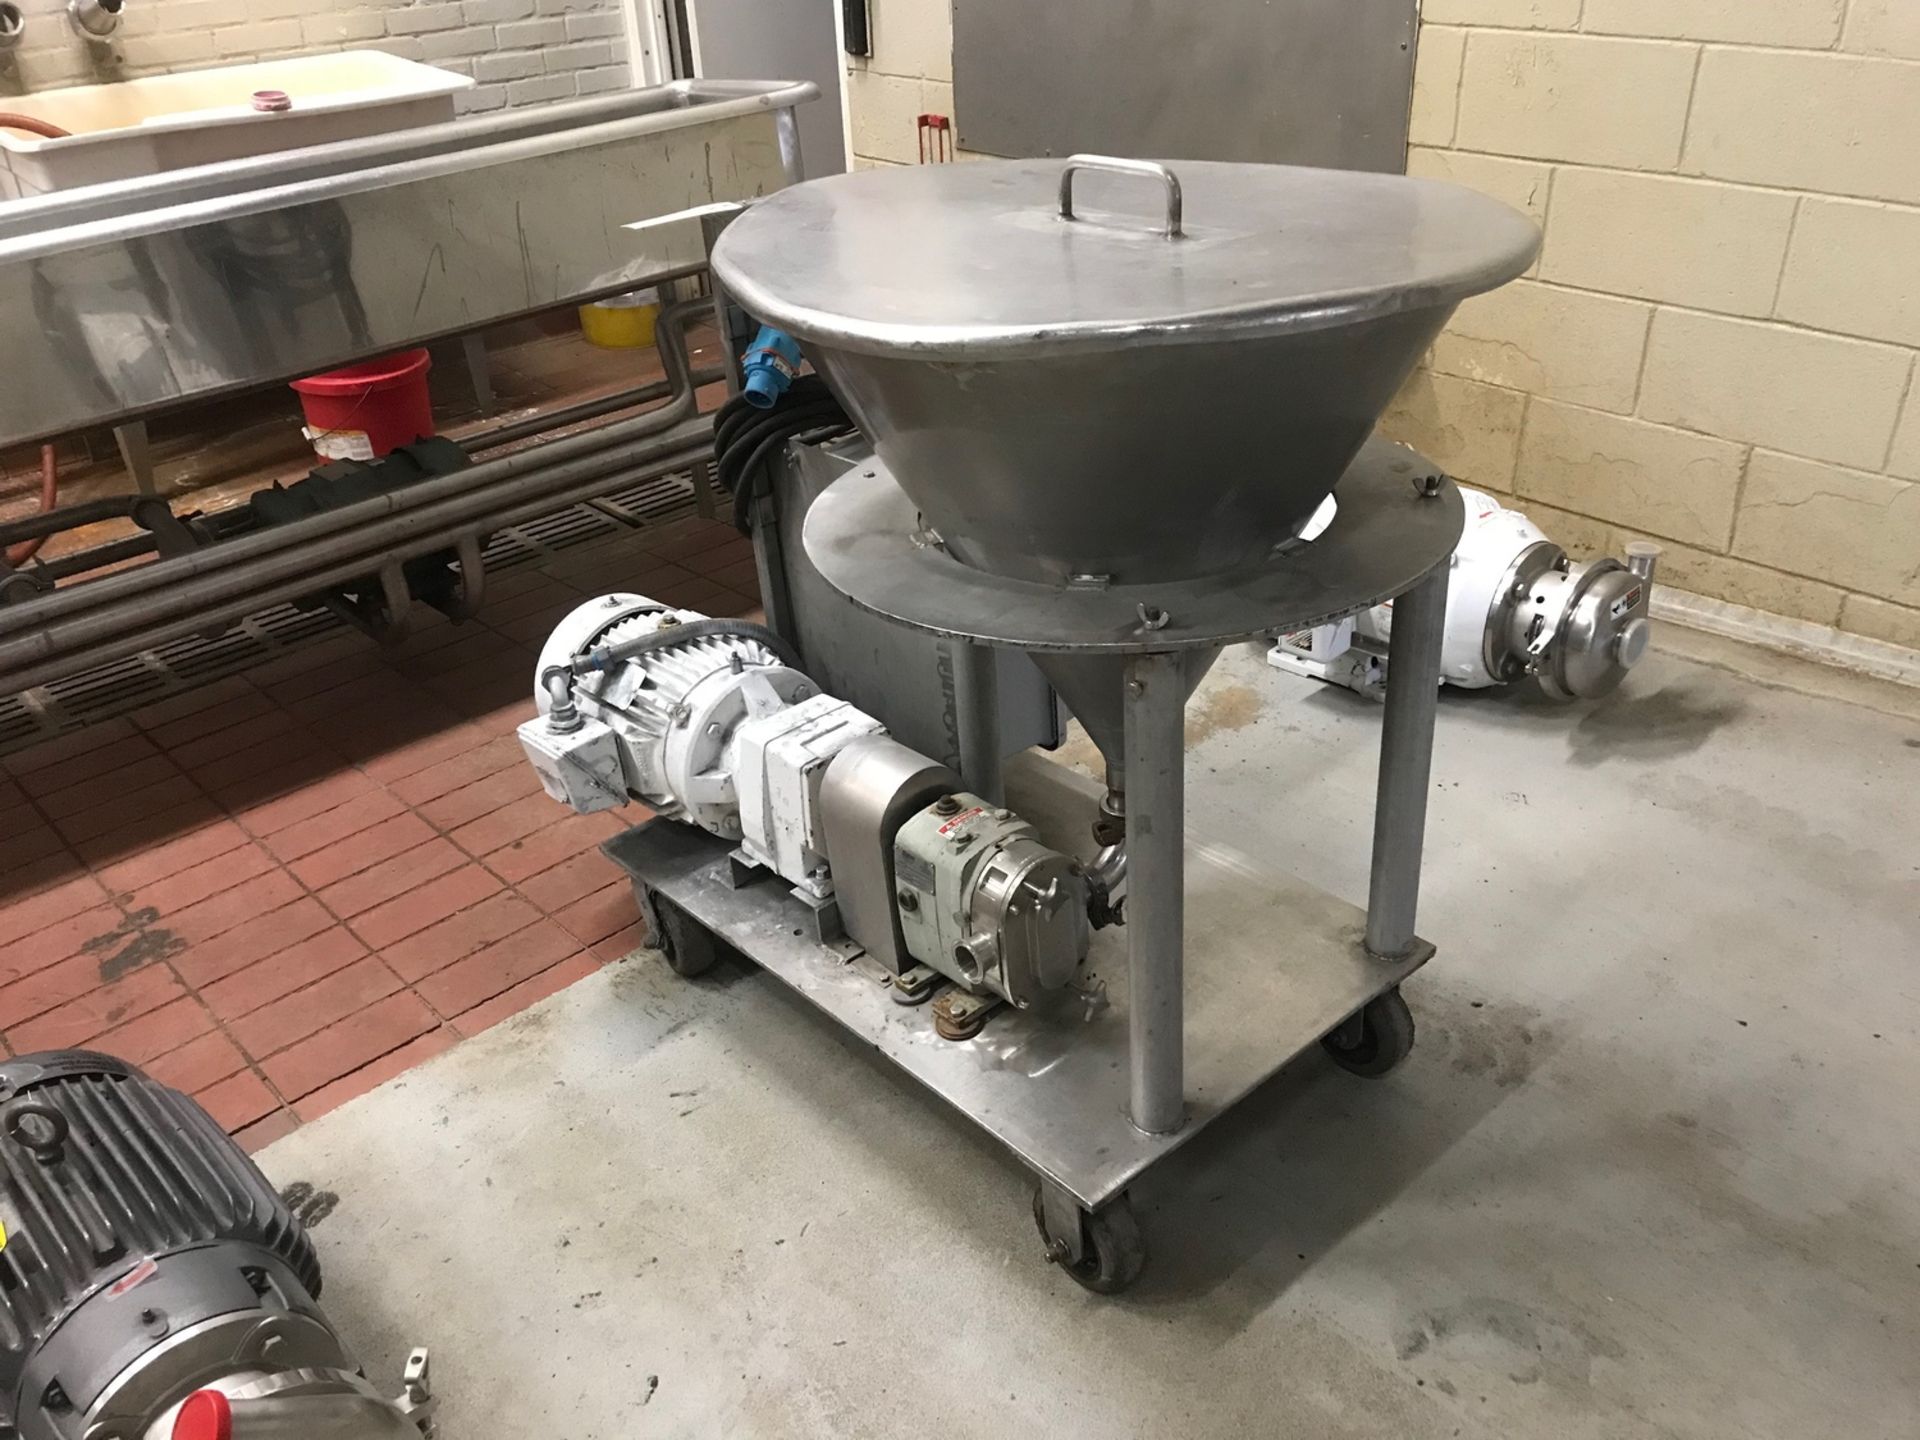 Fristam Model FKL20A, PD Pump, 1.5" Connections, with Dry Ingredient Hopper & Stainless Steel Stand